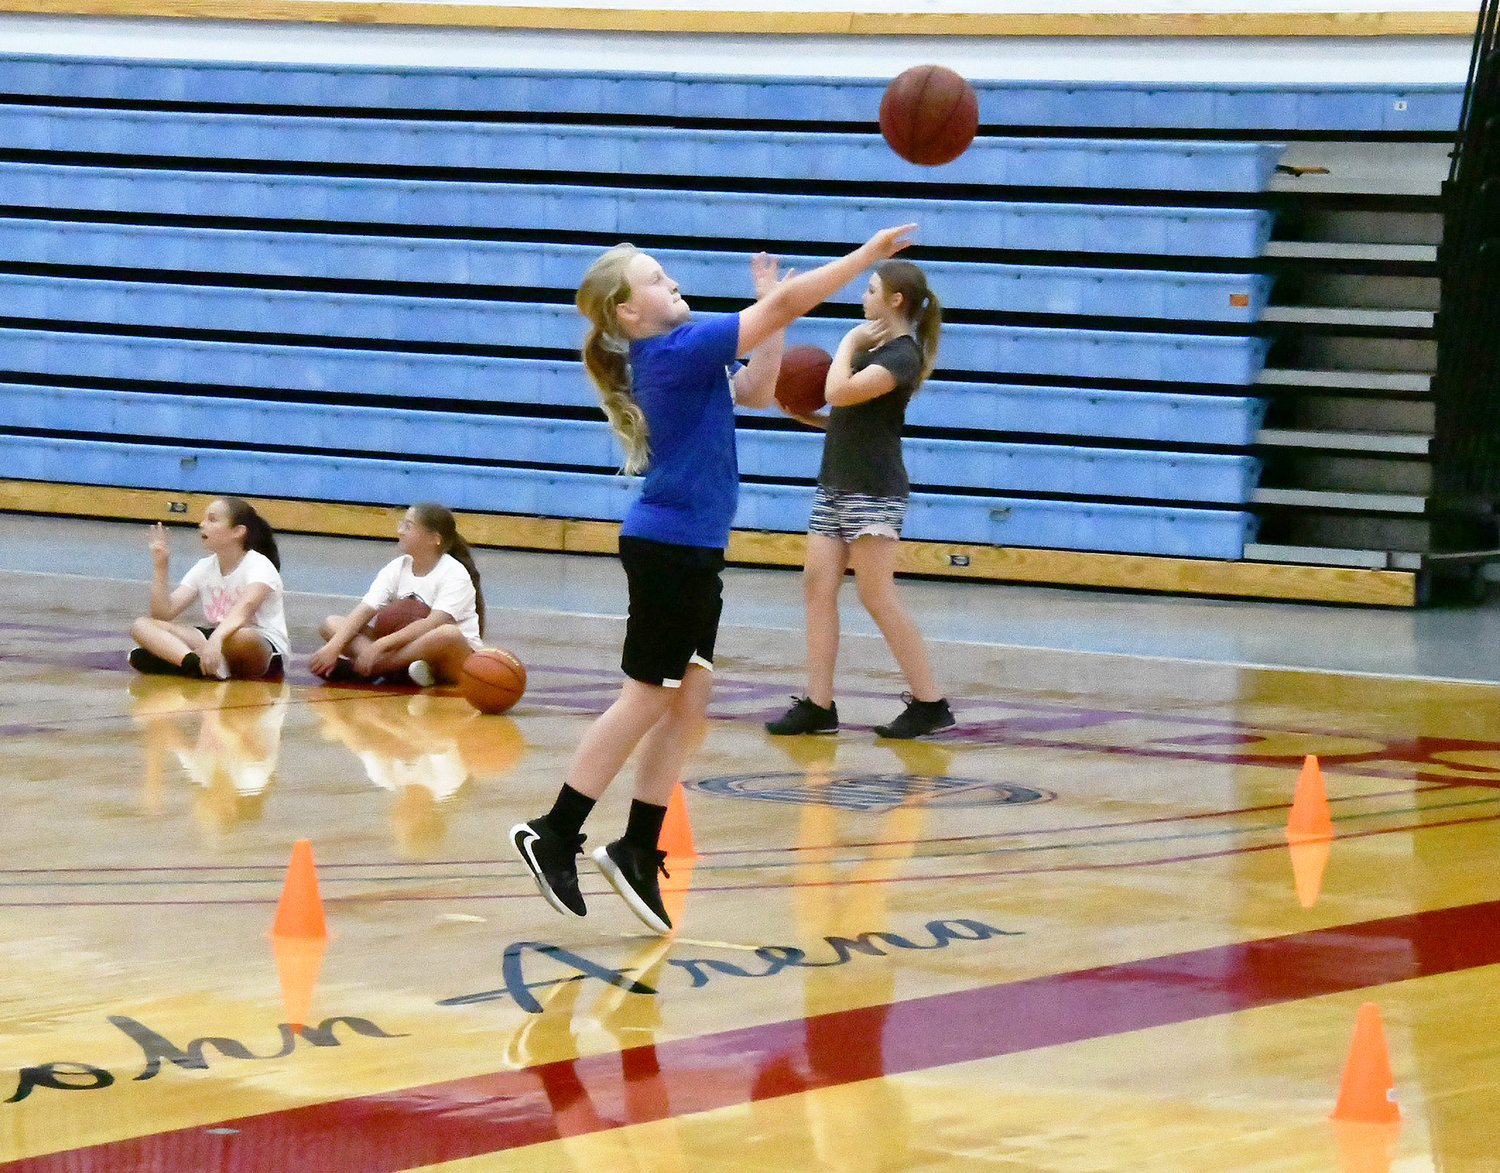 Cones were set up on the floor for shooting drills, with Berklee Taylor attempting a shot here.